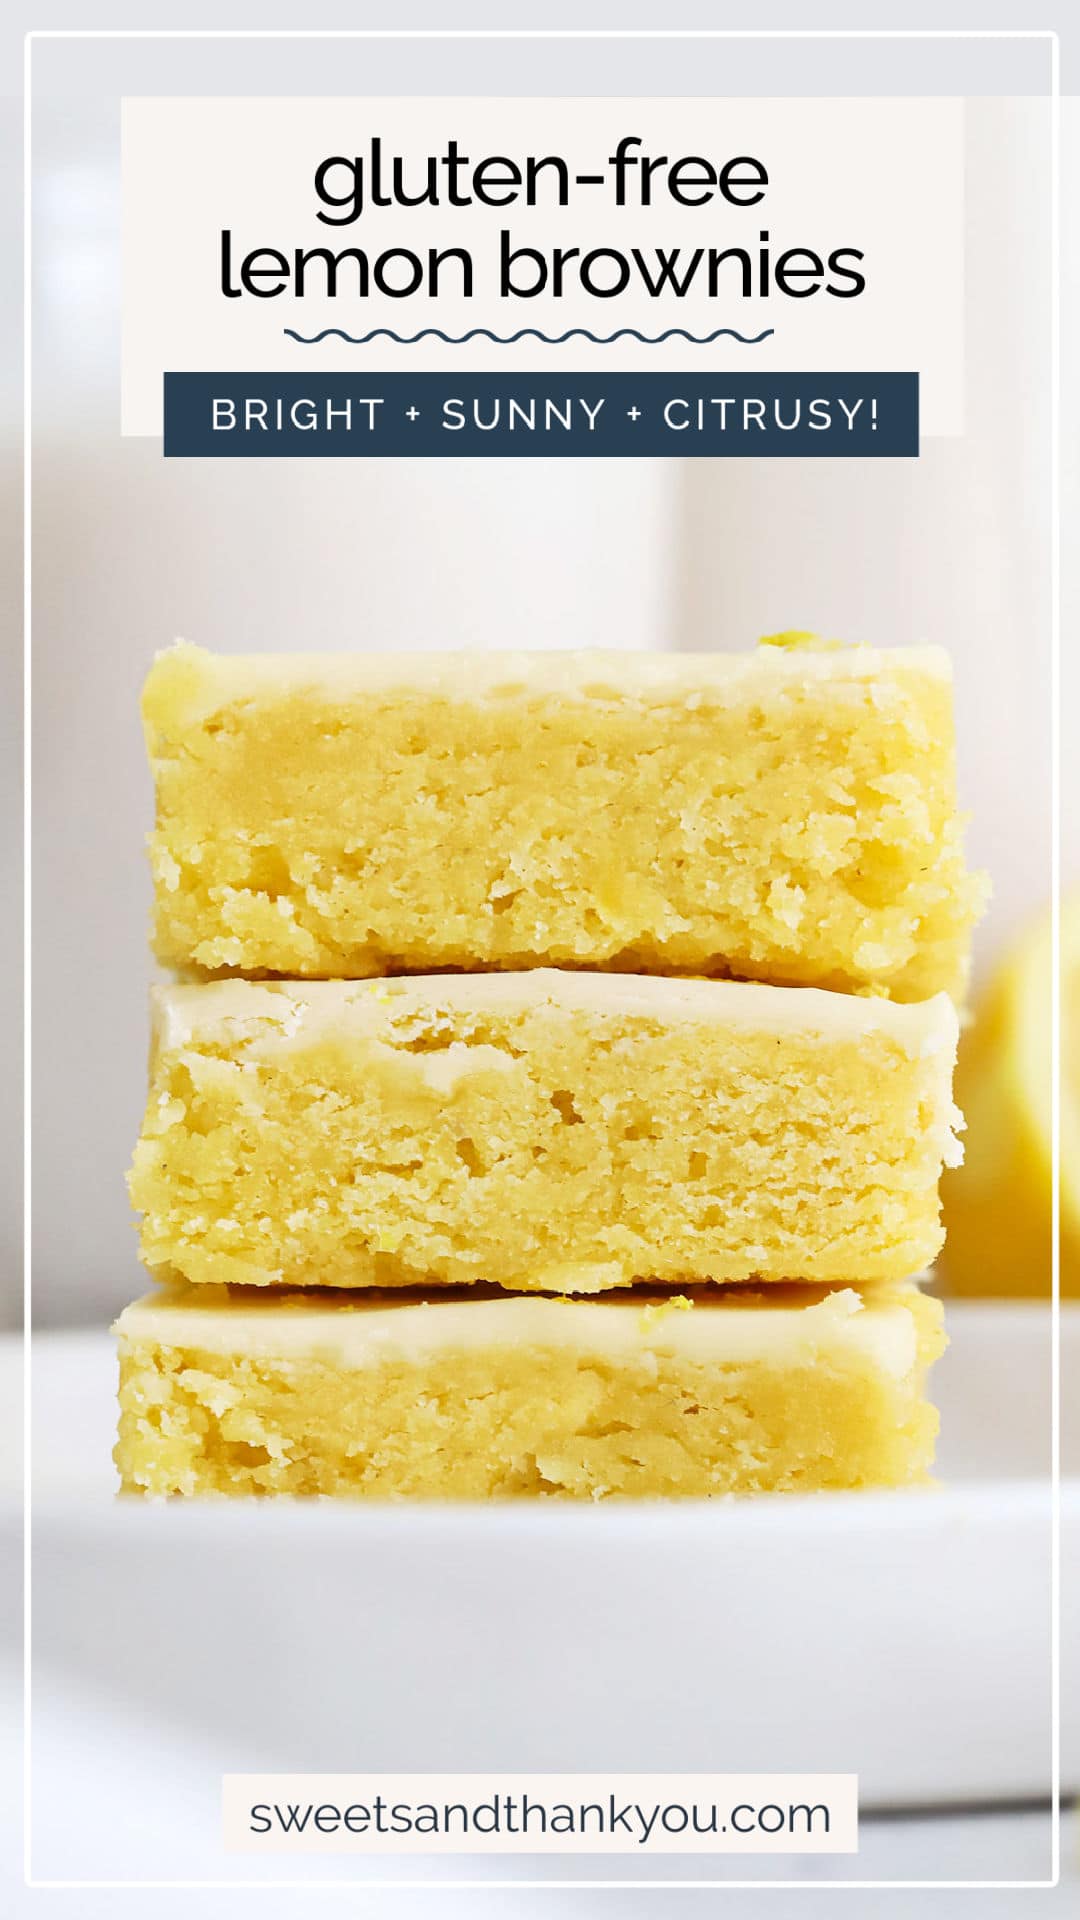 Gluten-Free Lemon Brownies - These fudgy lemon brownies are full of zesty citrus flavor. They're like taking a bite out of sunshine! // gluten free lemon brownie recipe // the best lemon brownies // easy lemon brownies // fudgy lemon brownie recipe // iced lemon brownies // lemon icing // lemon blondies // gluten-free lemon blondies // gluten-free lemon desserts // gluten-free Easter desserts // lemon dessert recipe // gluten-free spring dessert // gluten-free brownies